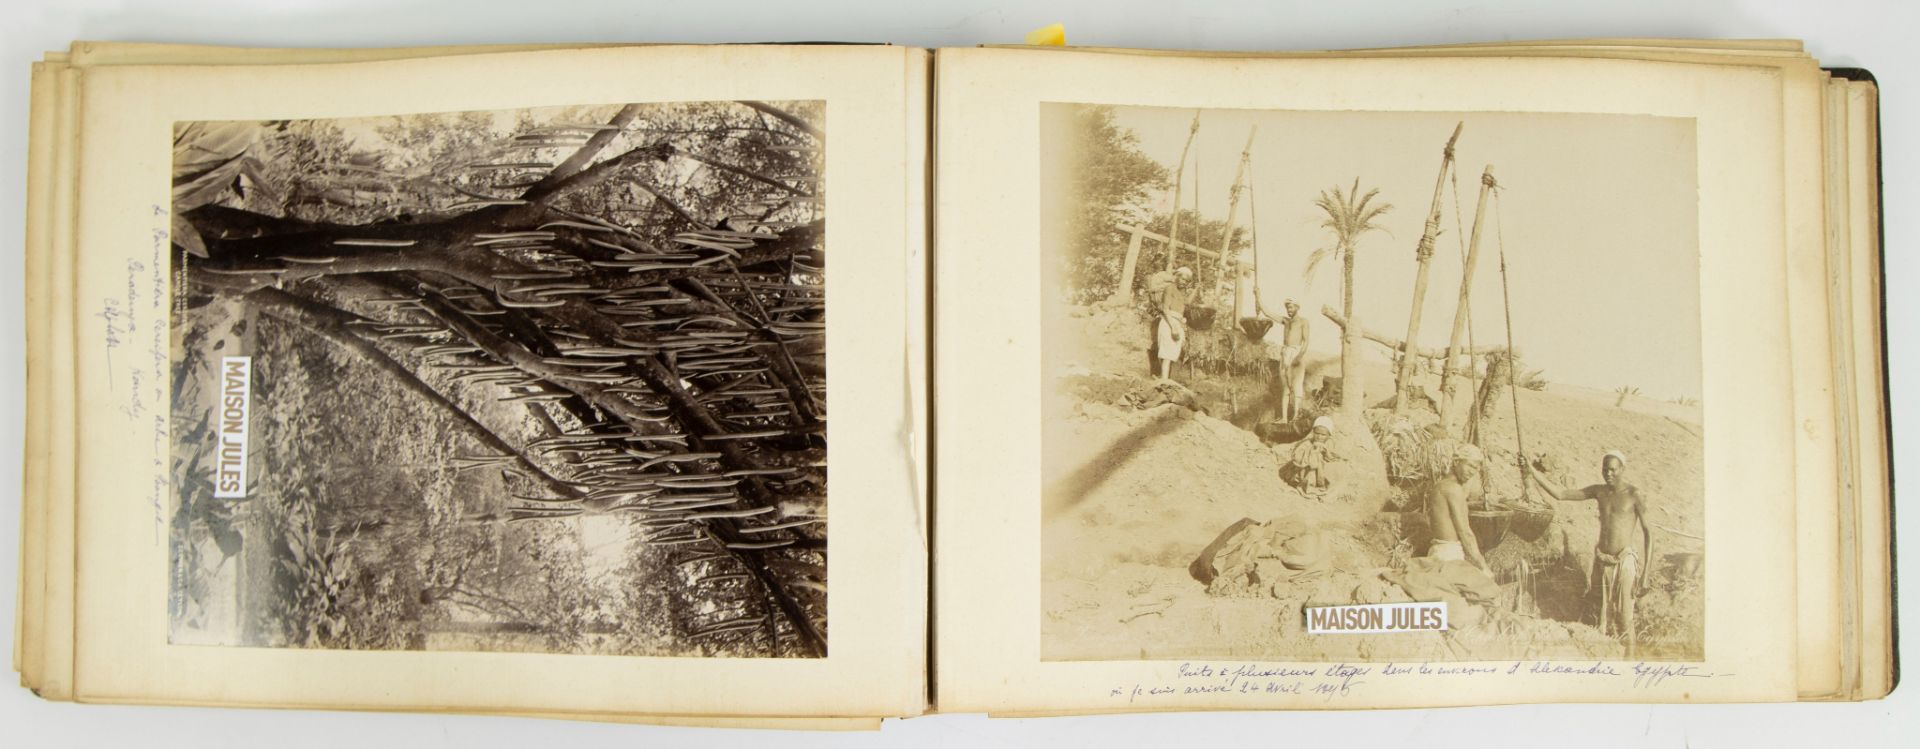 Photo album: A Belgian fellowship embarks on a world tour from 1896 to 1897 - Image 2 of 5